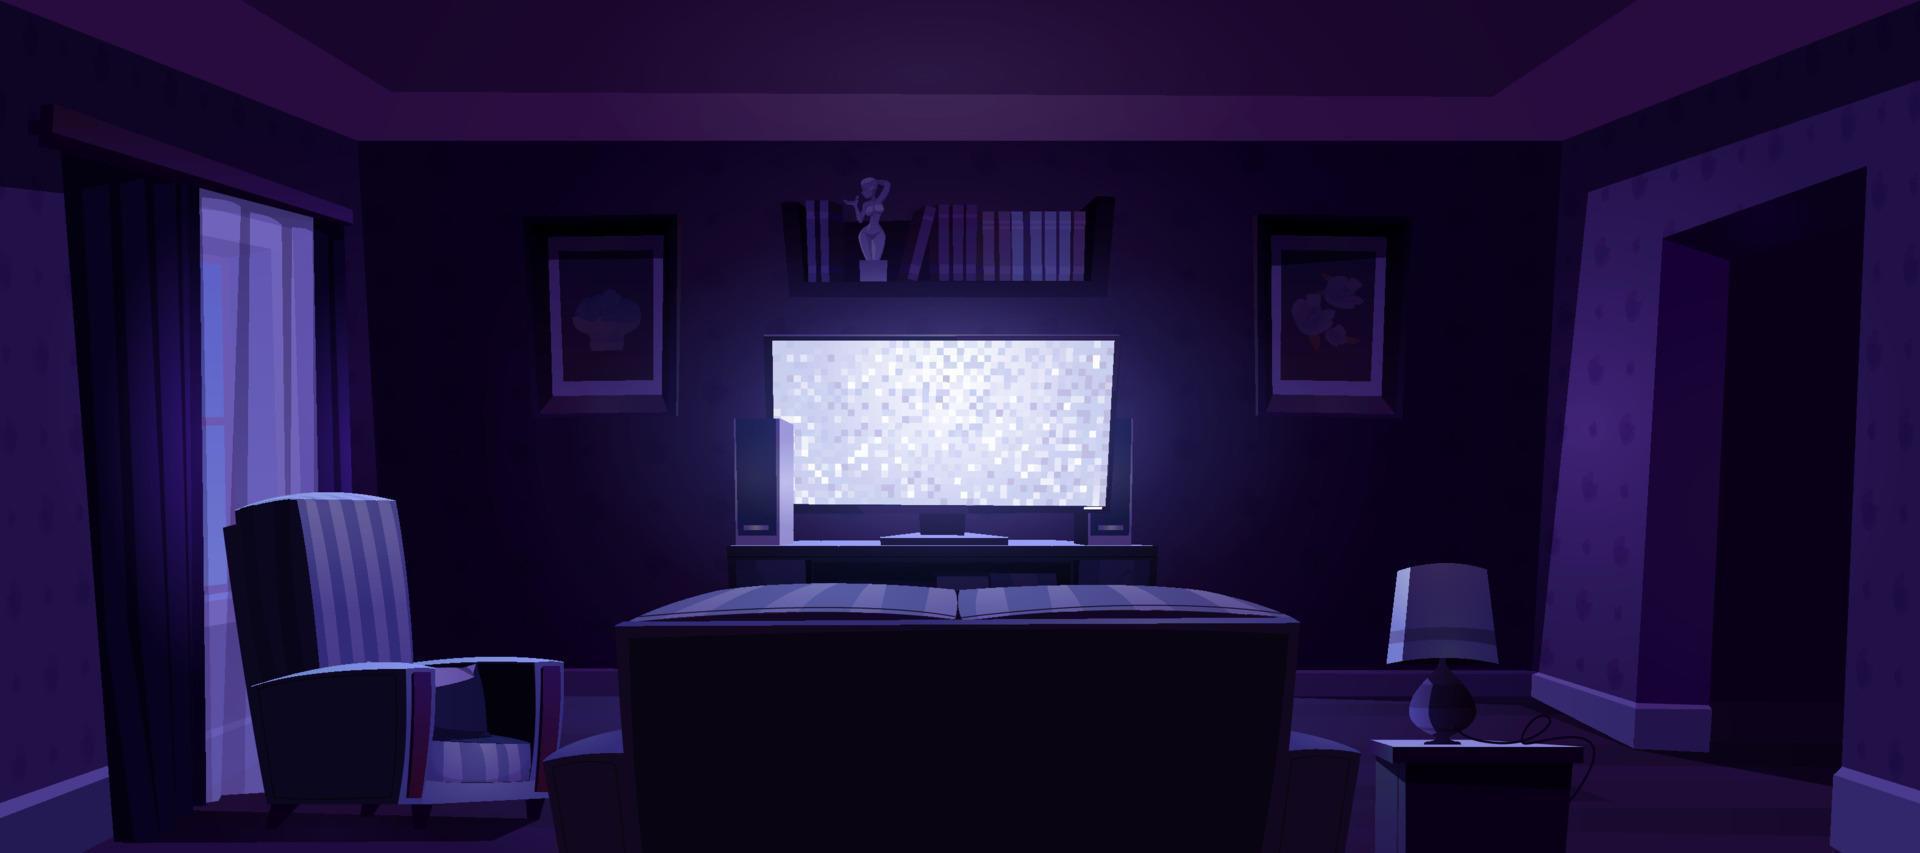 Living room with sofa and tv screen at night vector